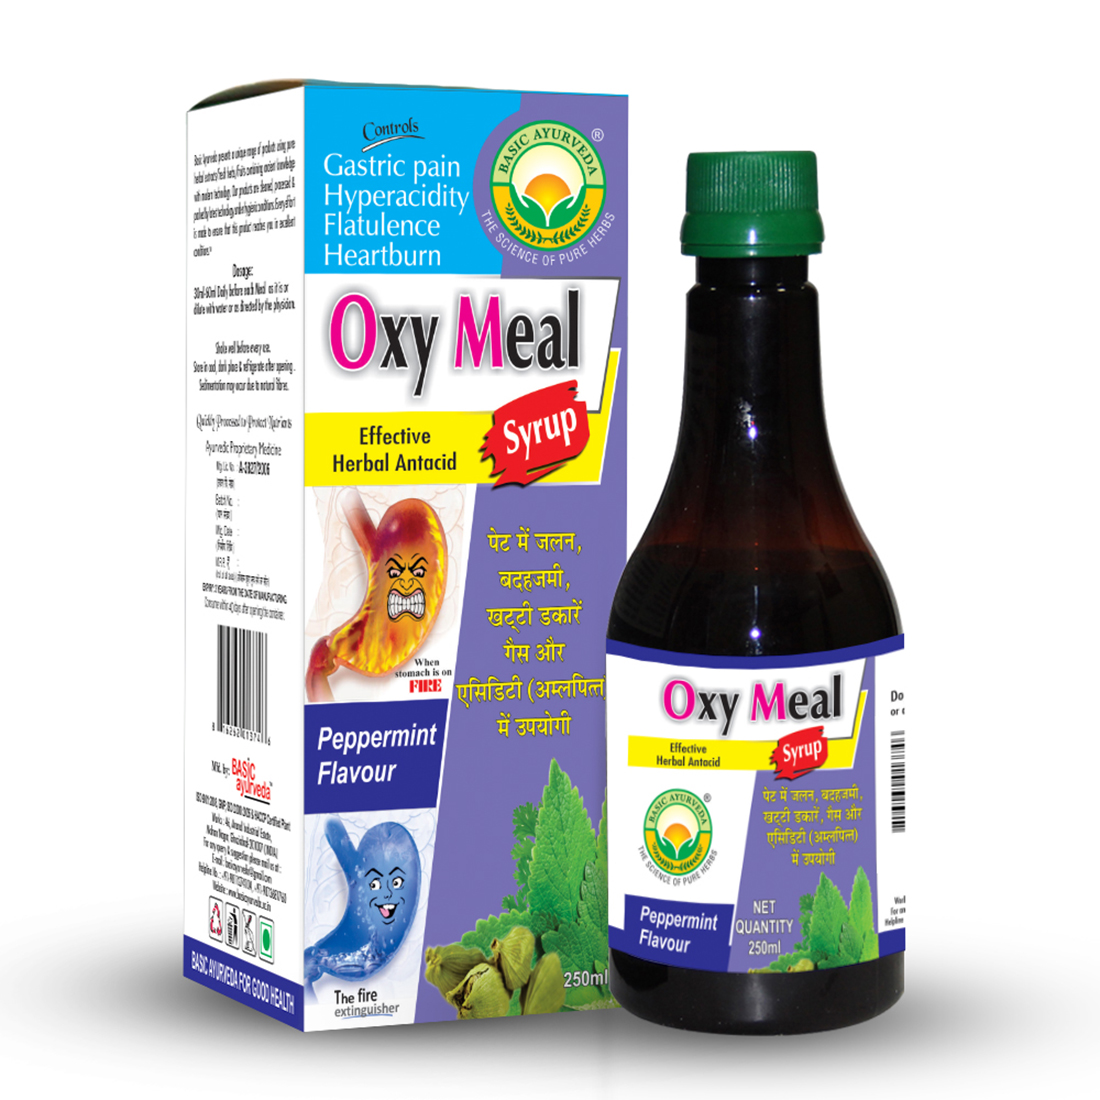 Oxy Meal Syrup